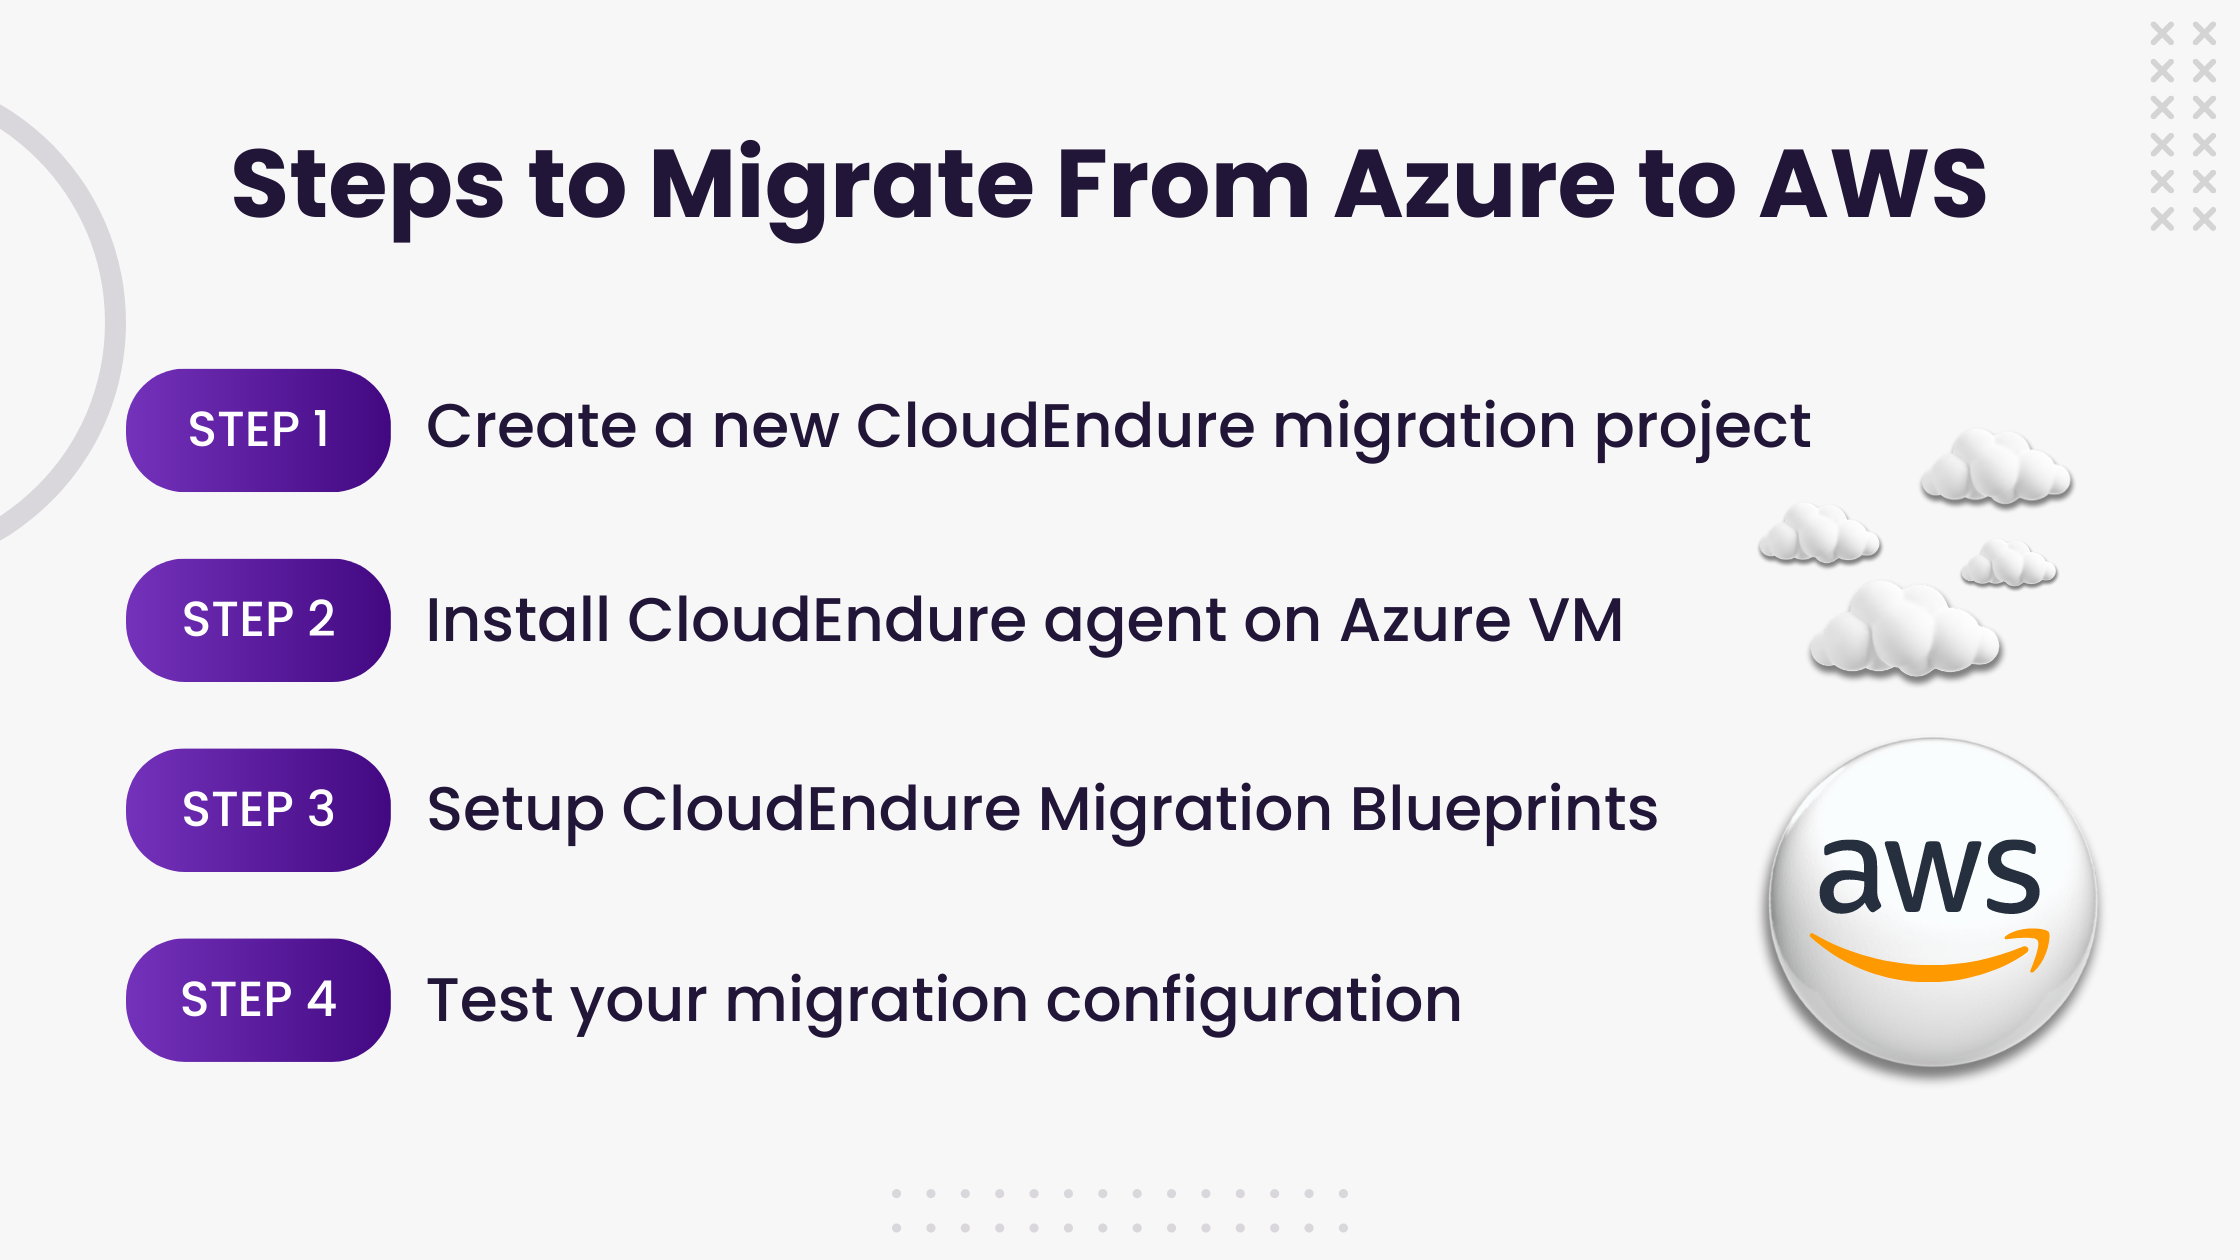 Steps to migrate from Azure to AWS